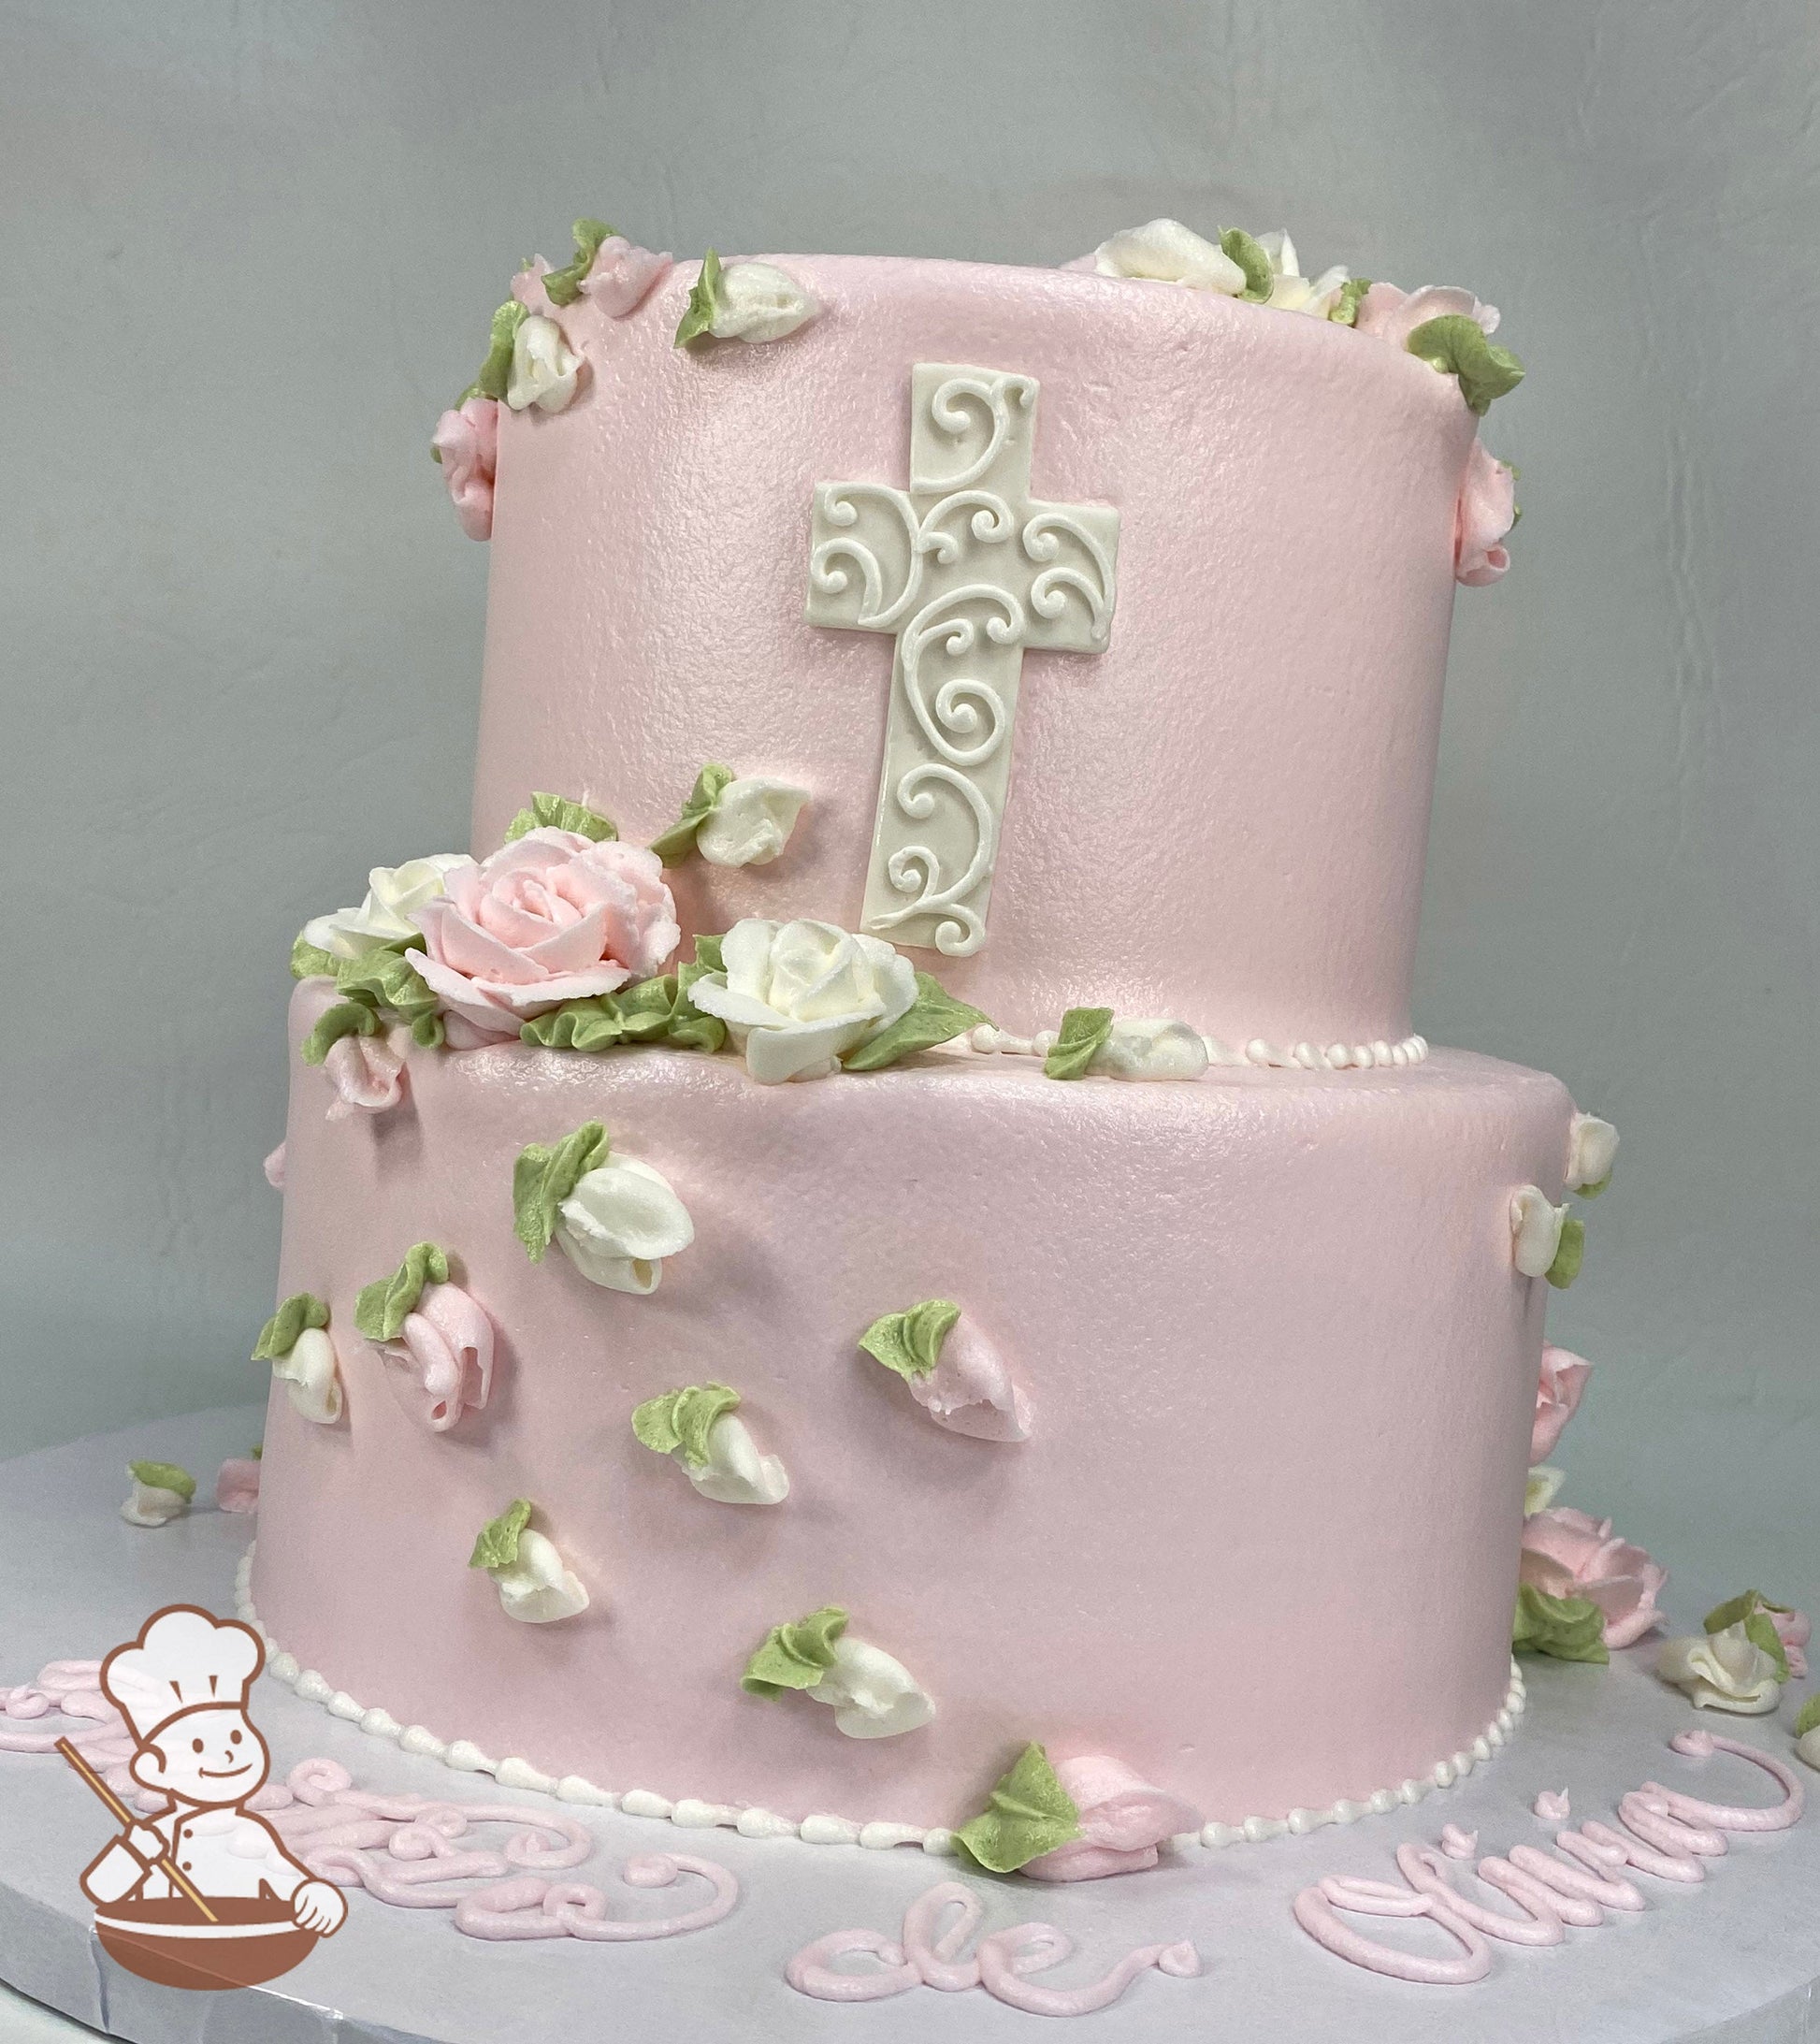 2-tier round cake with smooth light pink icing and buttercream roses in light pink and white colors and a white fondant cross on the cake wall.